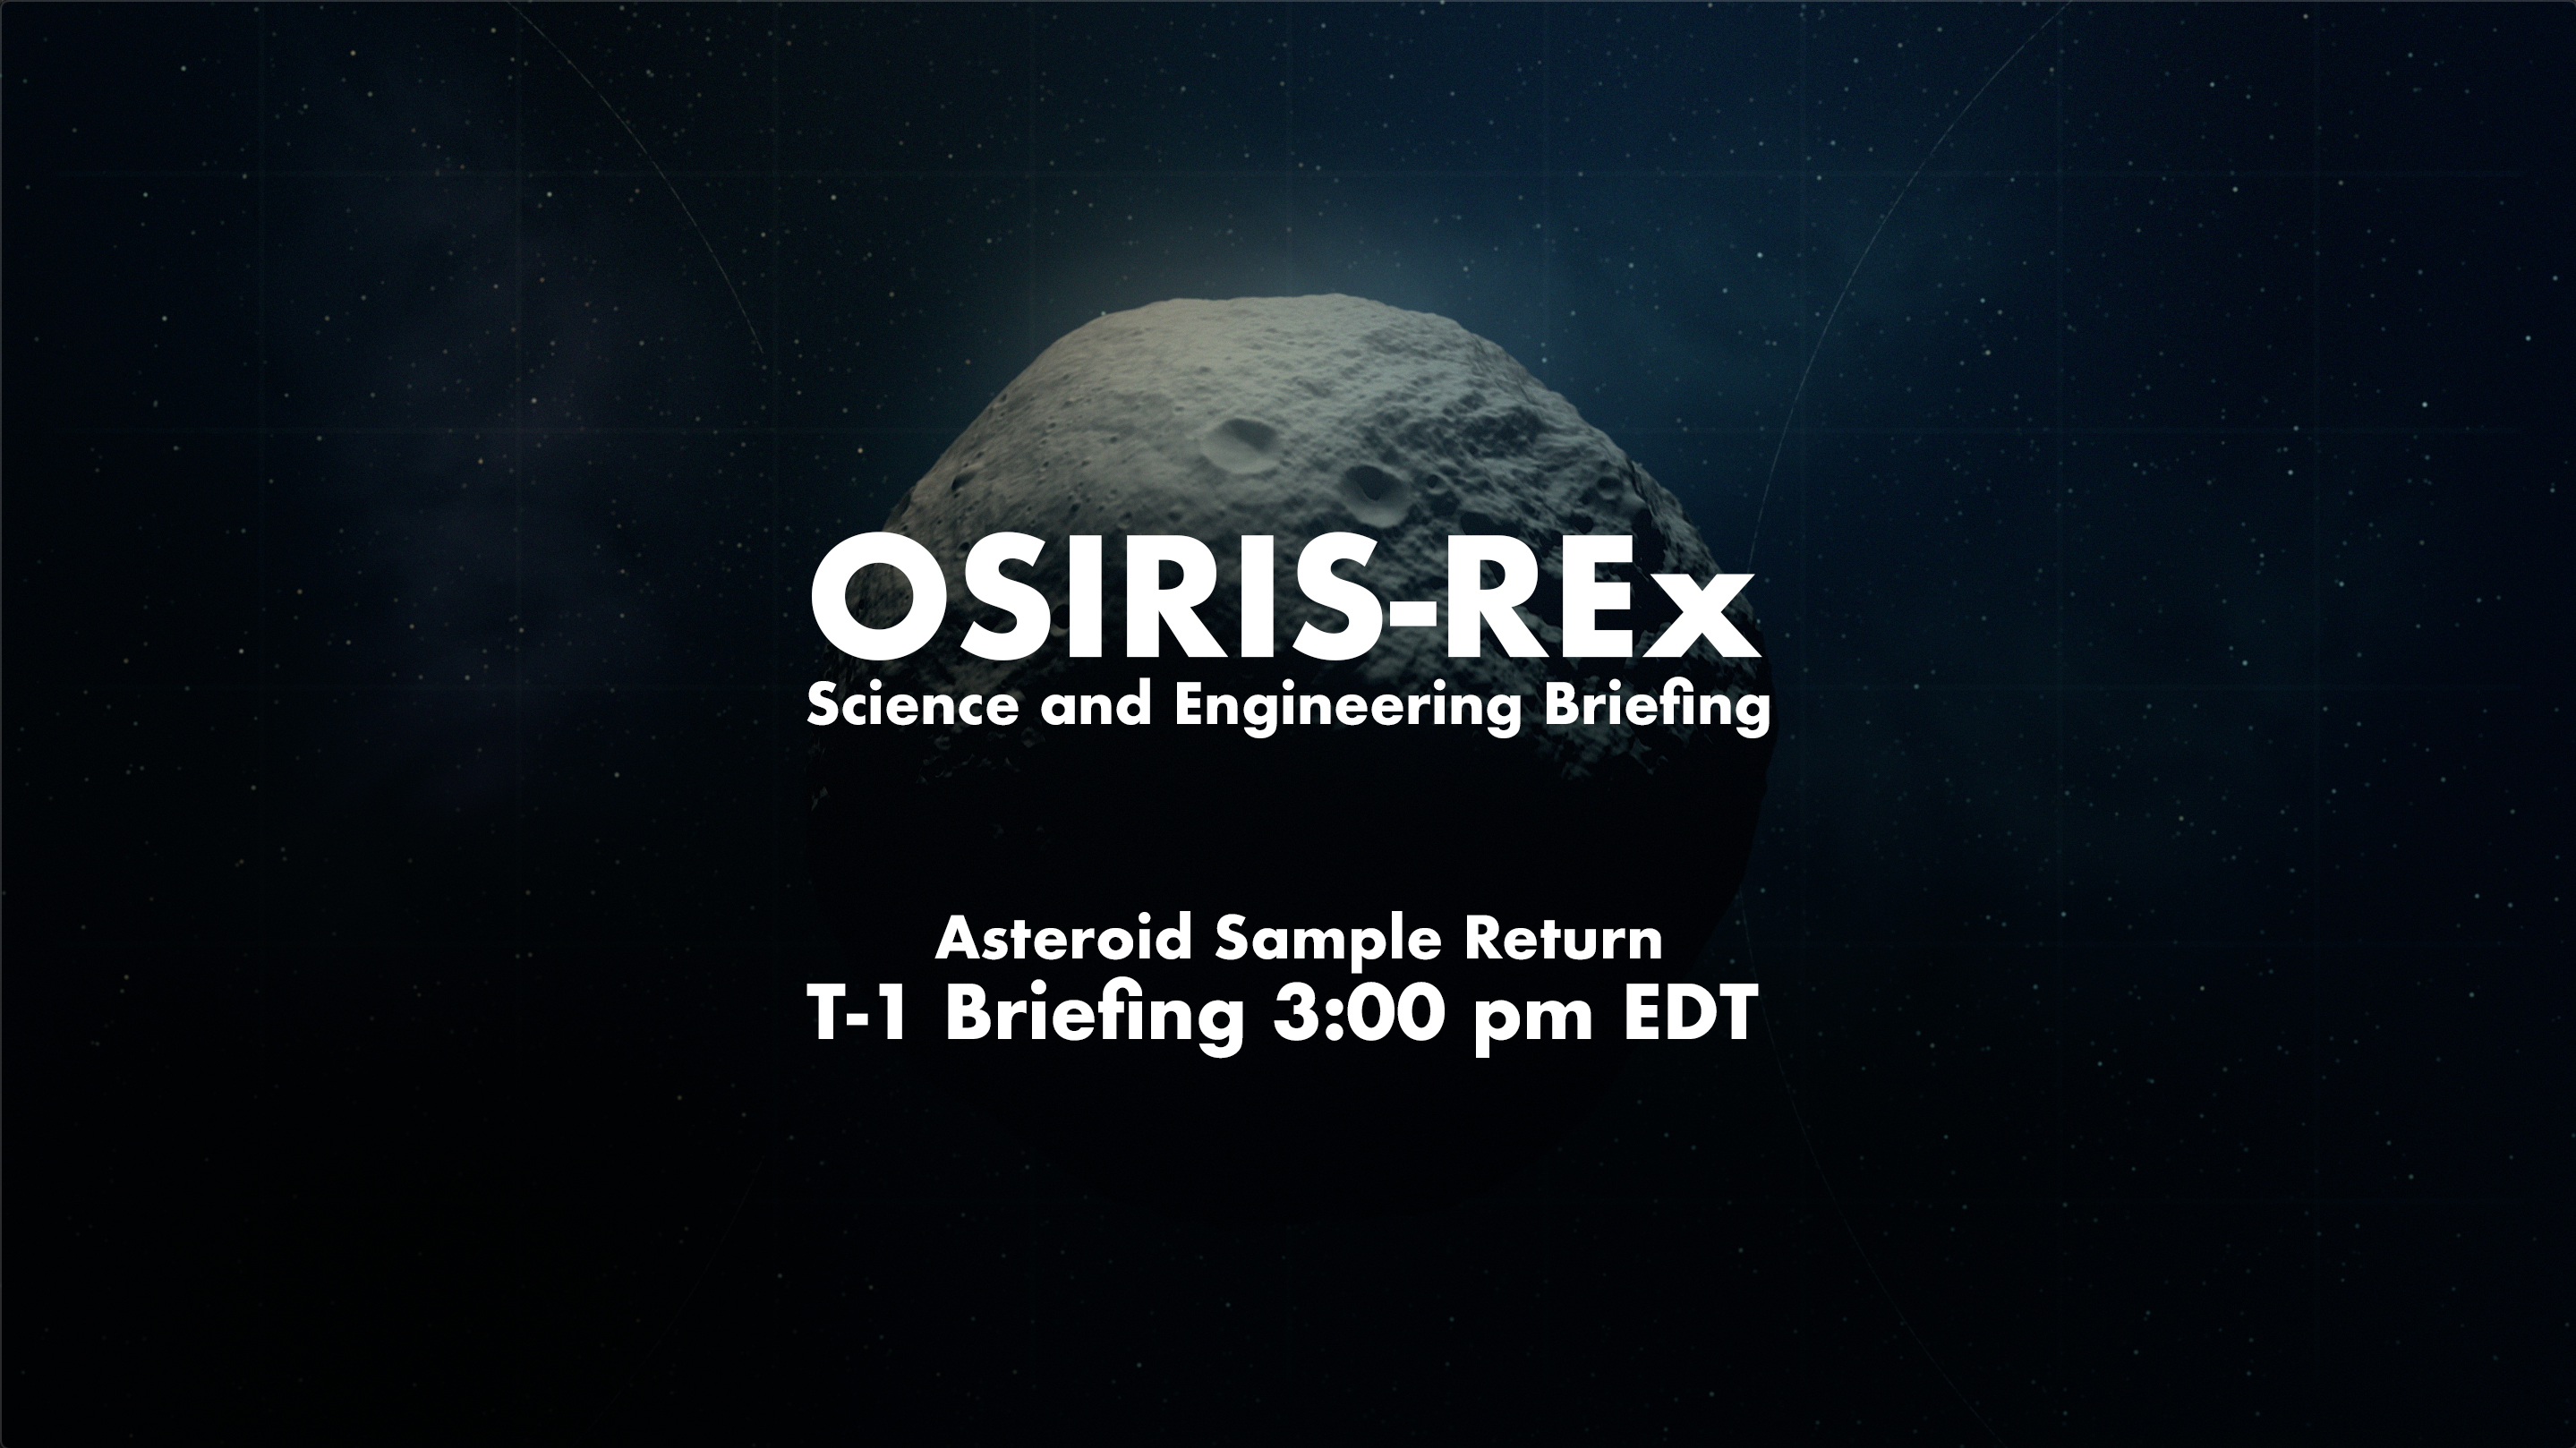 Main title for T-1 OSIRIS-REx Science and Engineering Briefing